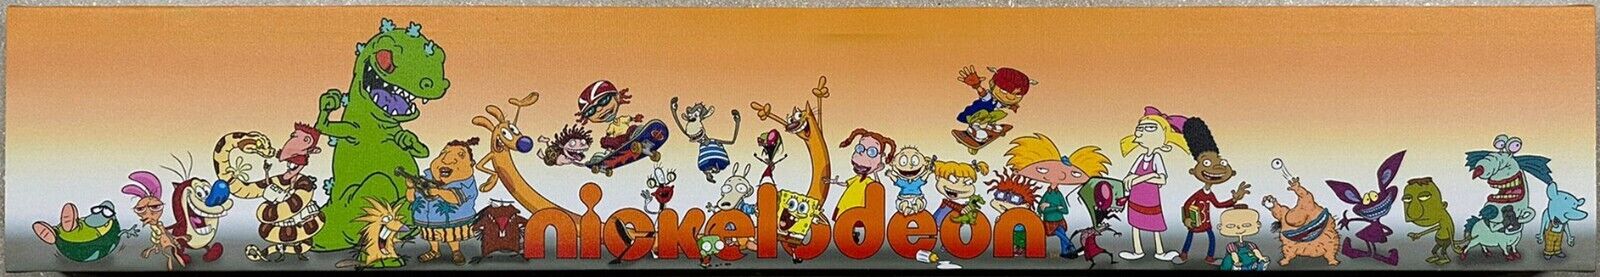 Nickelodeon Pop Creations Vintage 90's Characters Canvas Wall Art 36x6x2